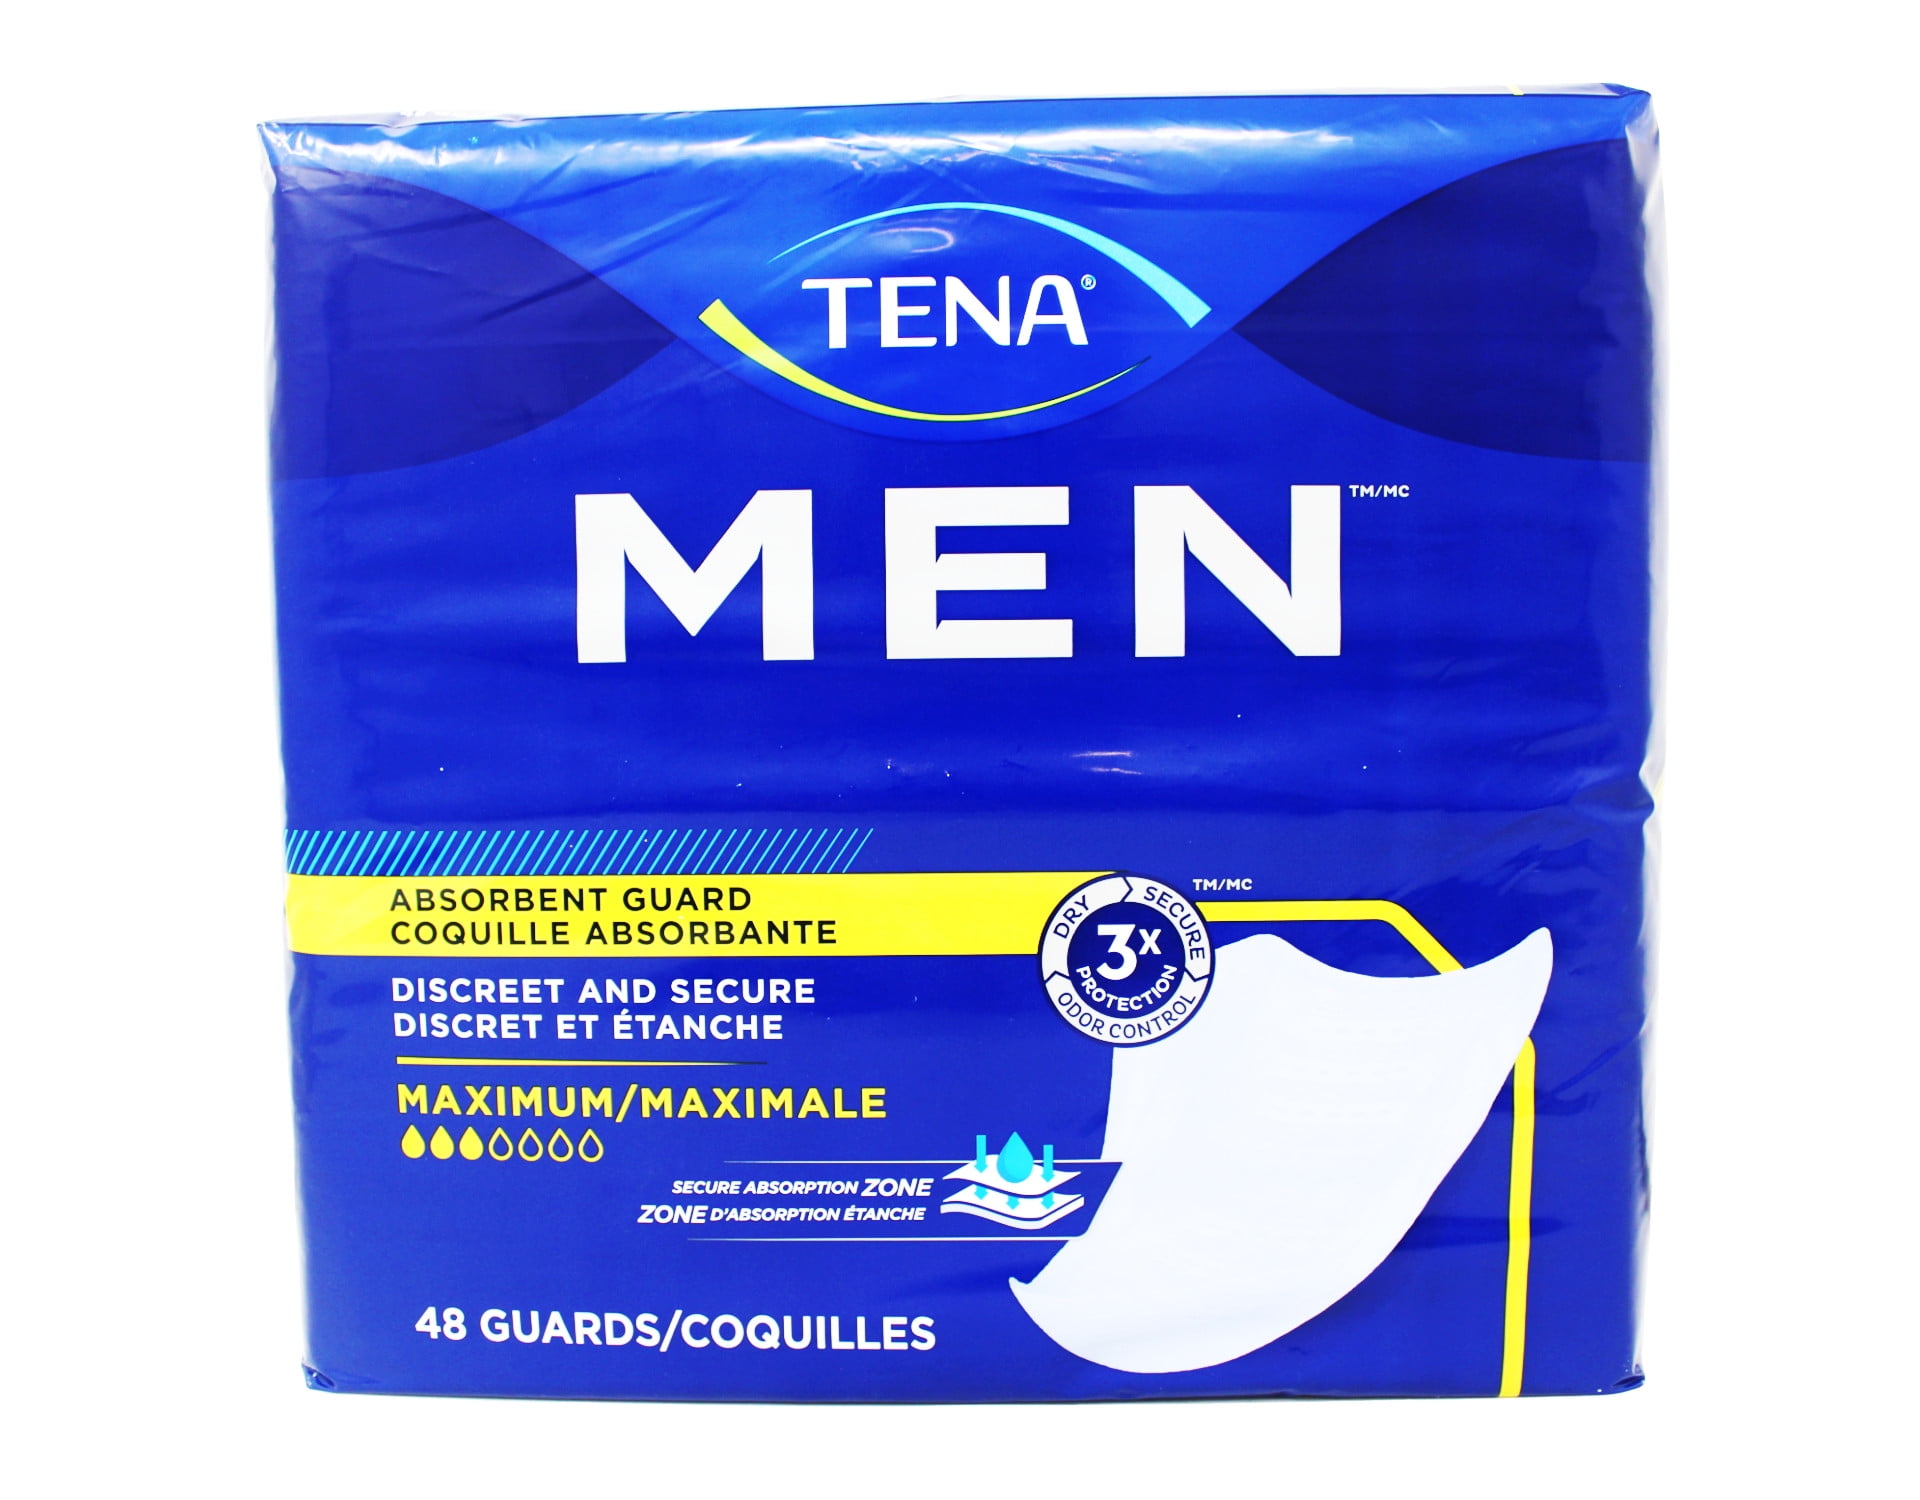 Tena Men Incontinence Protective Guards, Moderate/Level 2